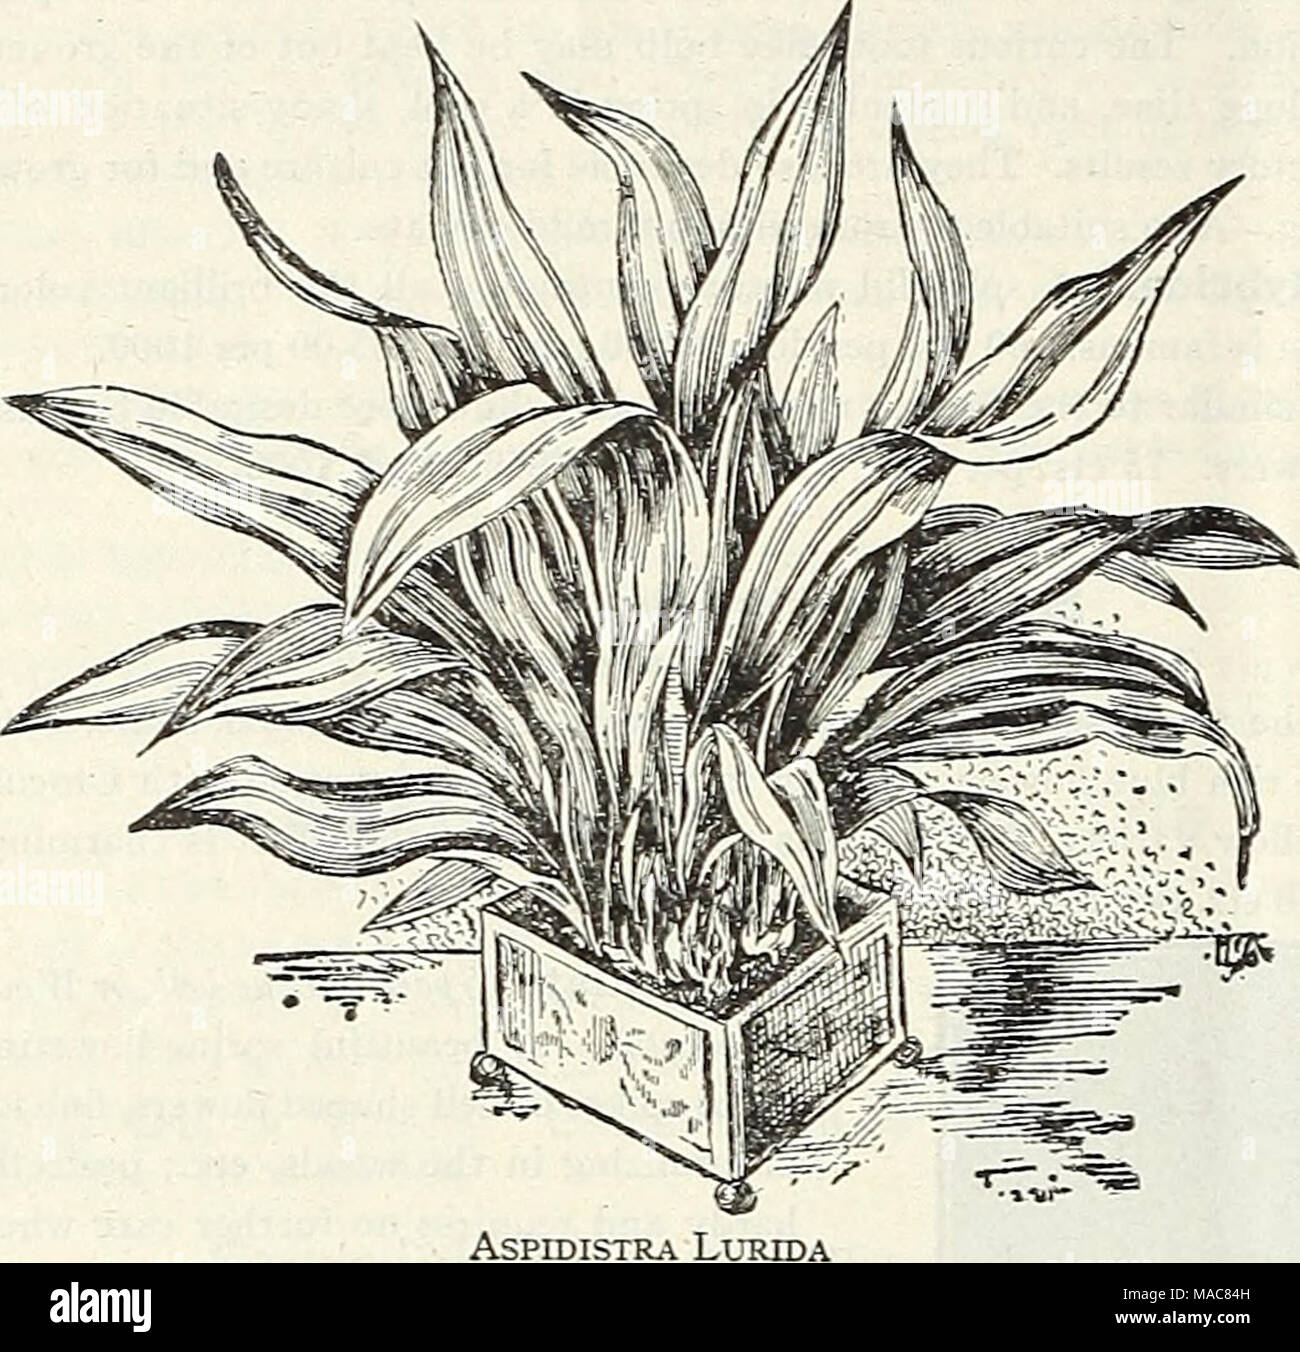 . Dreer's midsummer list 1931 . Agapanthus (Blue LUy of the Nile) UmbellatUS. A splendid ornamental plant, bearing clusters of bright, blue flowers on 3 feet long flower stalks lasting a long time in bloom. A most desirable plant for outdoor decoration, planted in large pots or tubs on the lawn or piazza. Strong flowering plants from 5-inch pots, $1.00; 8-inch pots, $3.00; large 12-inch tubs, $6.00 each. Agave (Century Plant) An old time favorite decorative plant which in years past was found in nearly every collection, useful as an individual specimen on the lawn or in the garden during the s Stock Photo